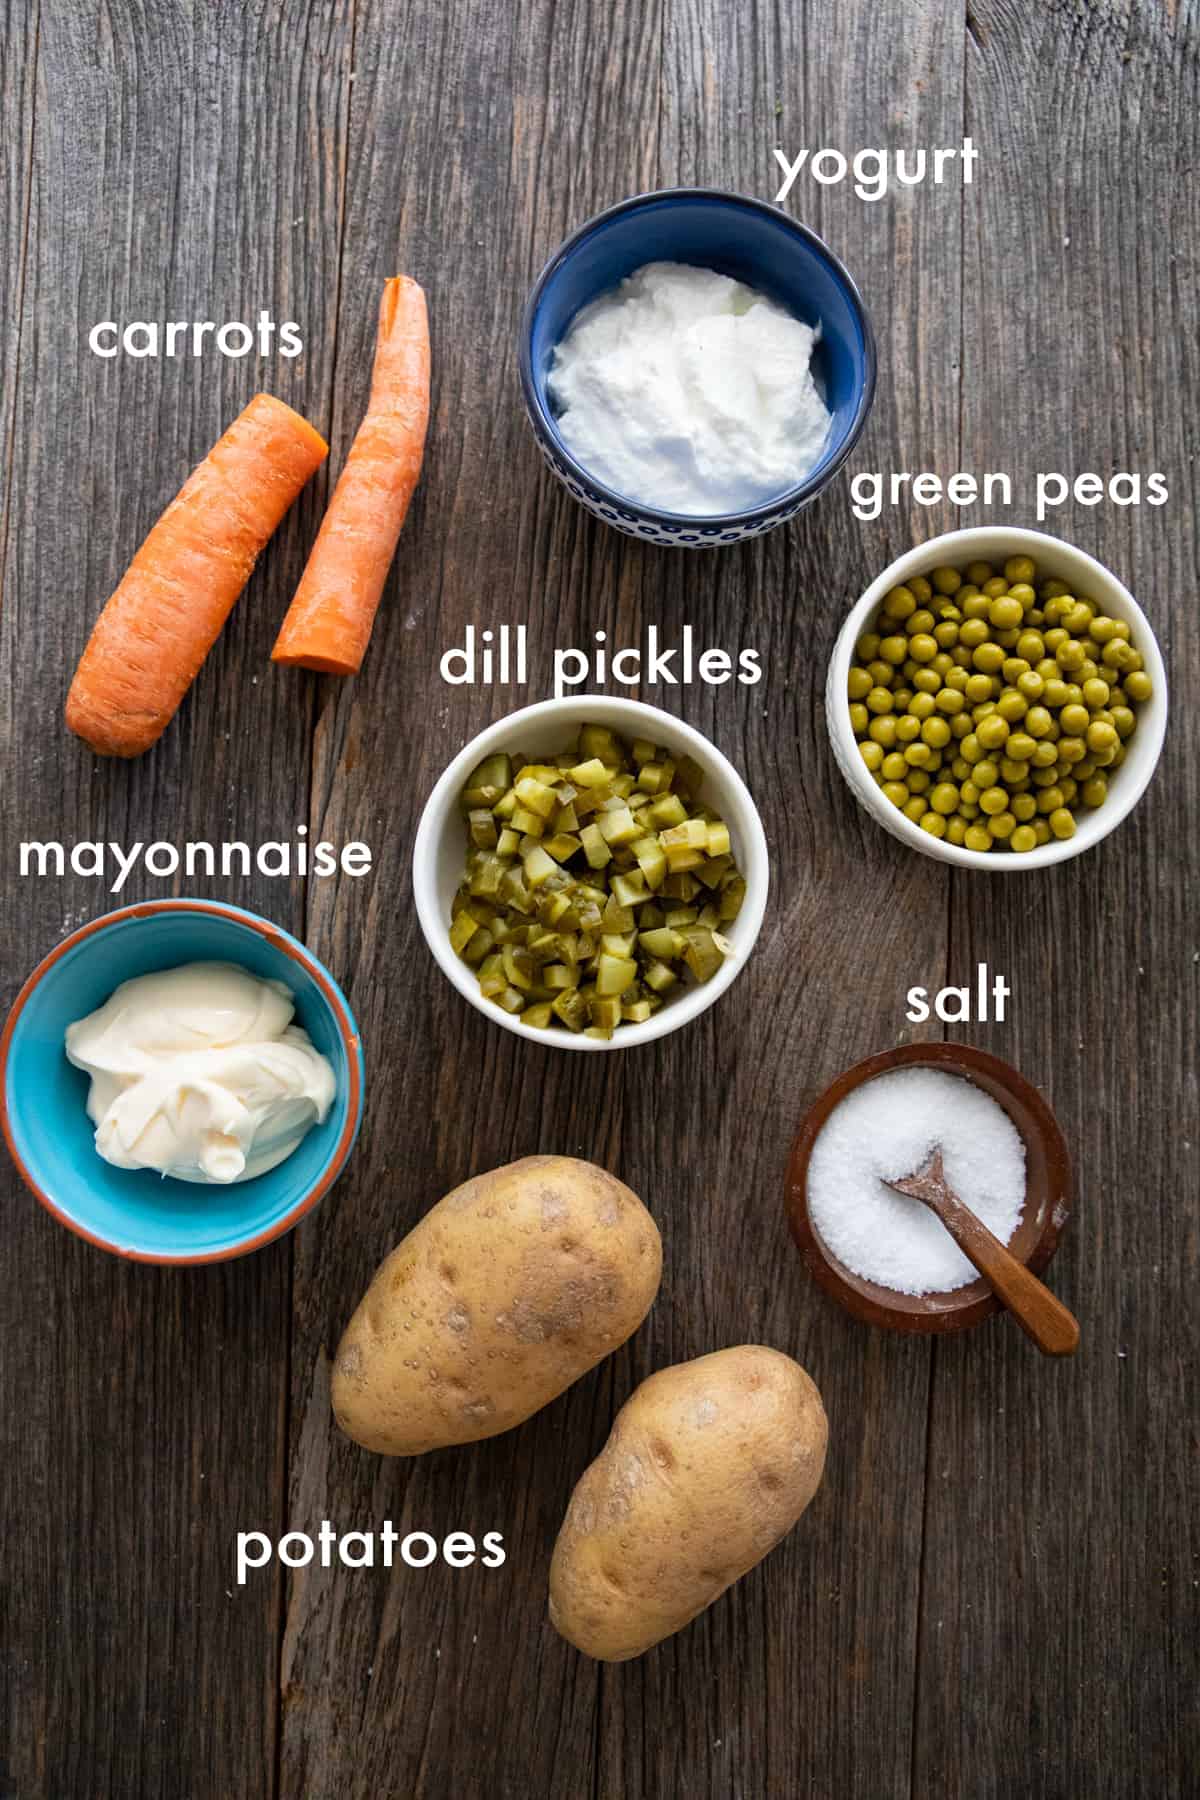 For this recipe you need potatoes, carrots, peas, dill pickles, yogurt, mayonnaise and salt.